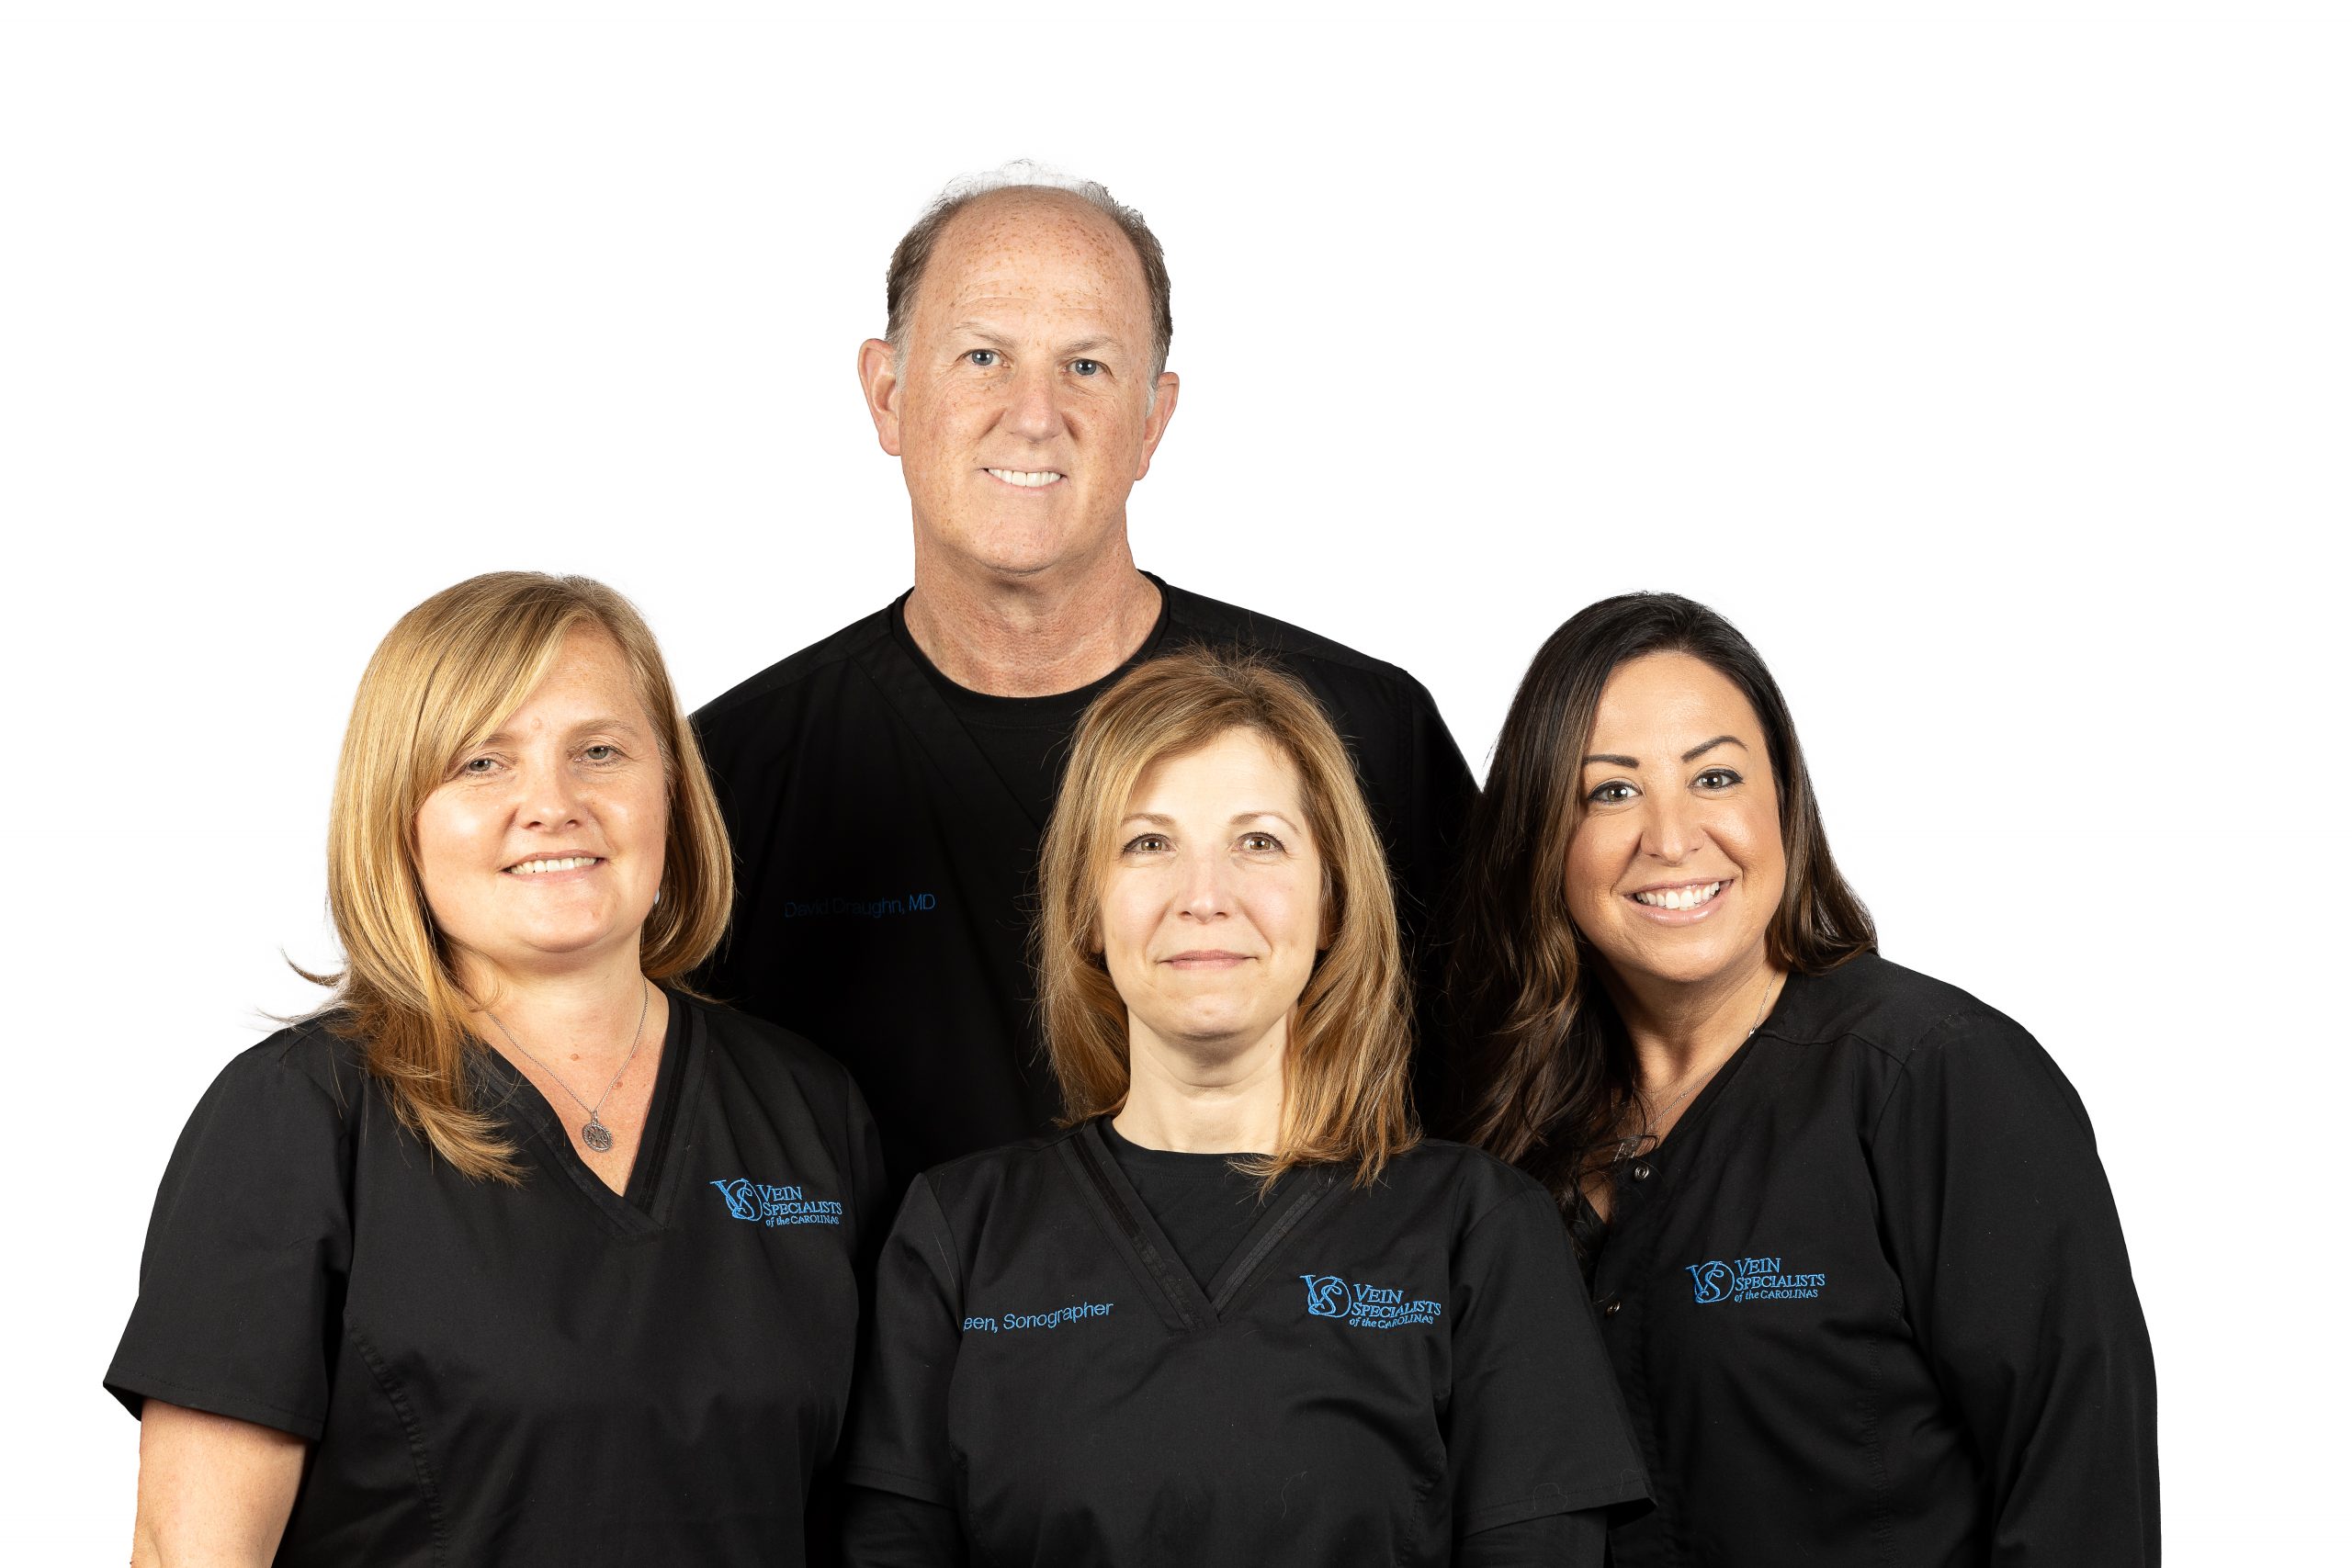 About Dr. Draughn, Vein Specialists of the Carolinas